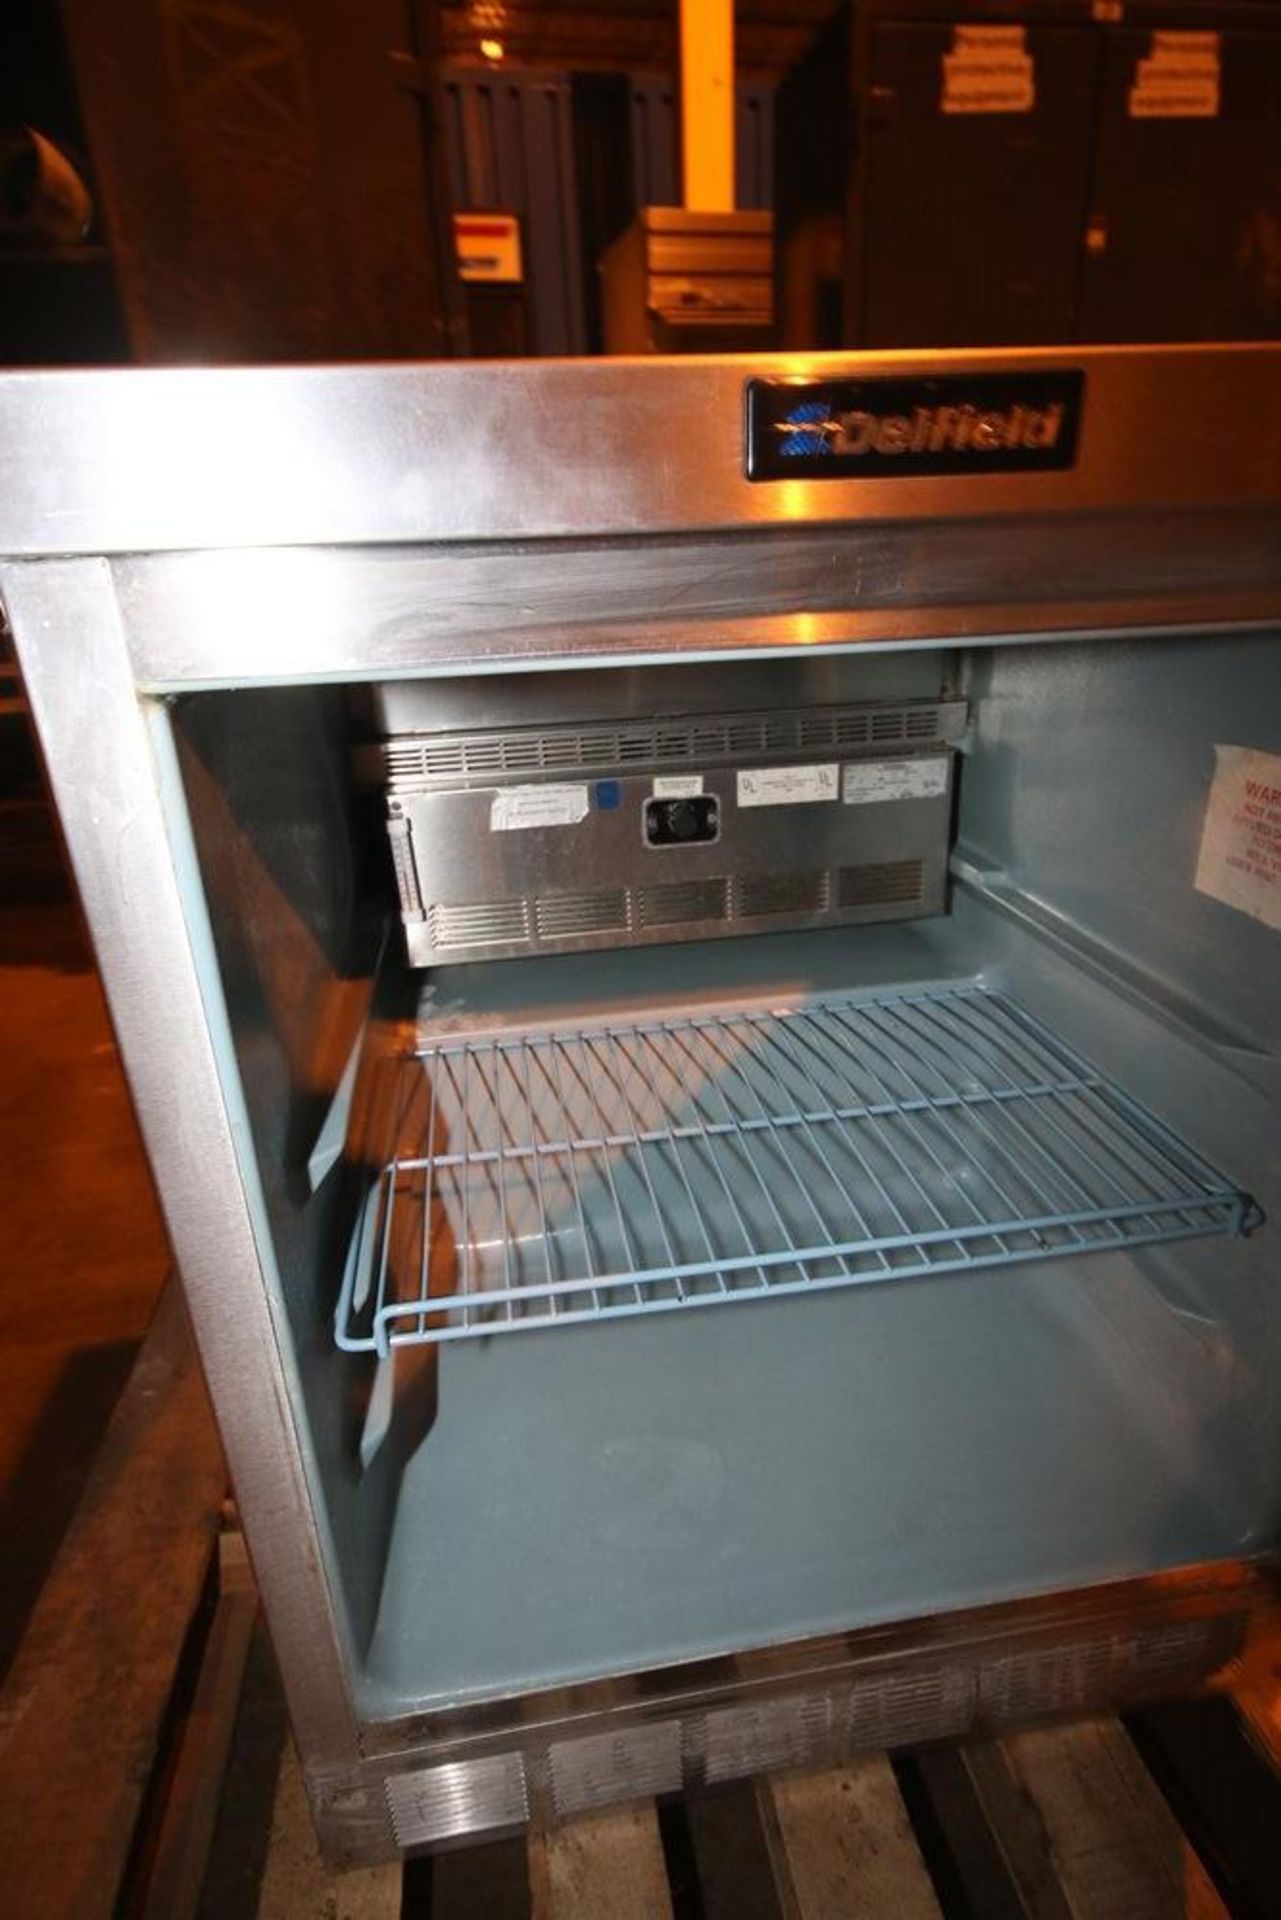 Delfield Single Door S/S Refrigerator (LOCATED IN BROCKPORT, NY) (NOTE: SUBJECT TO CONFIRMATION) - Image 4 of 4